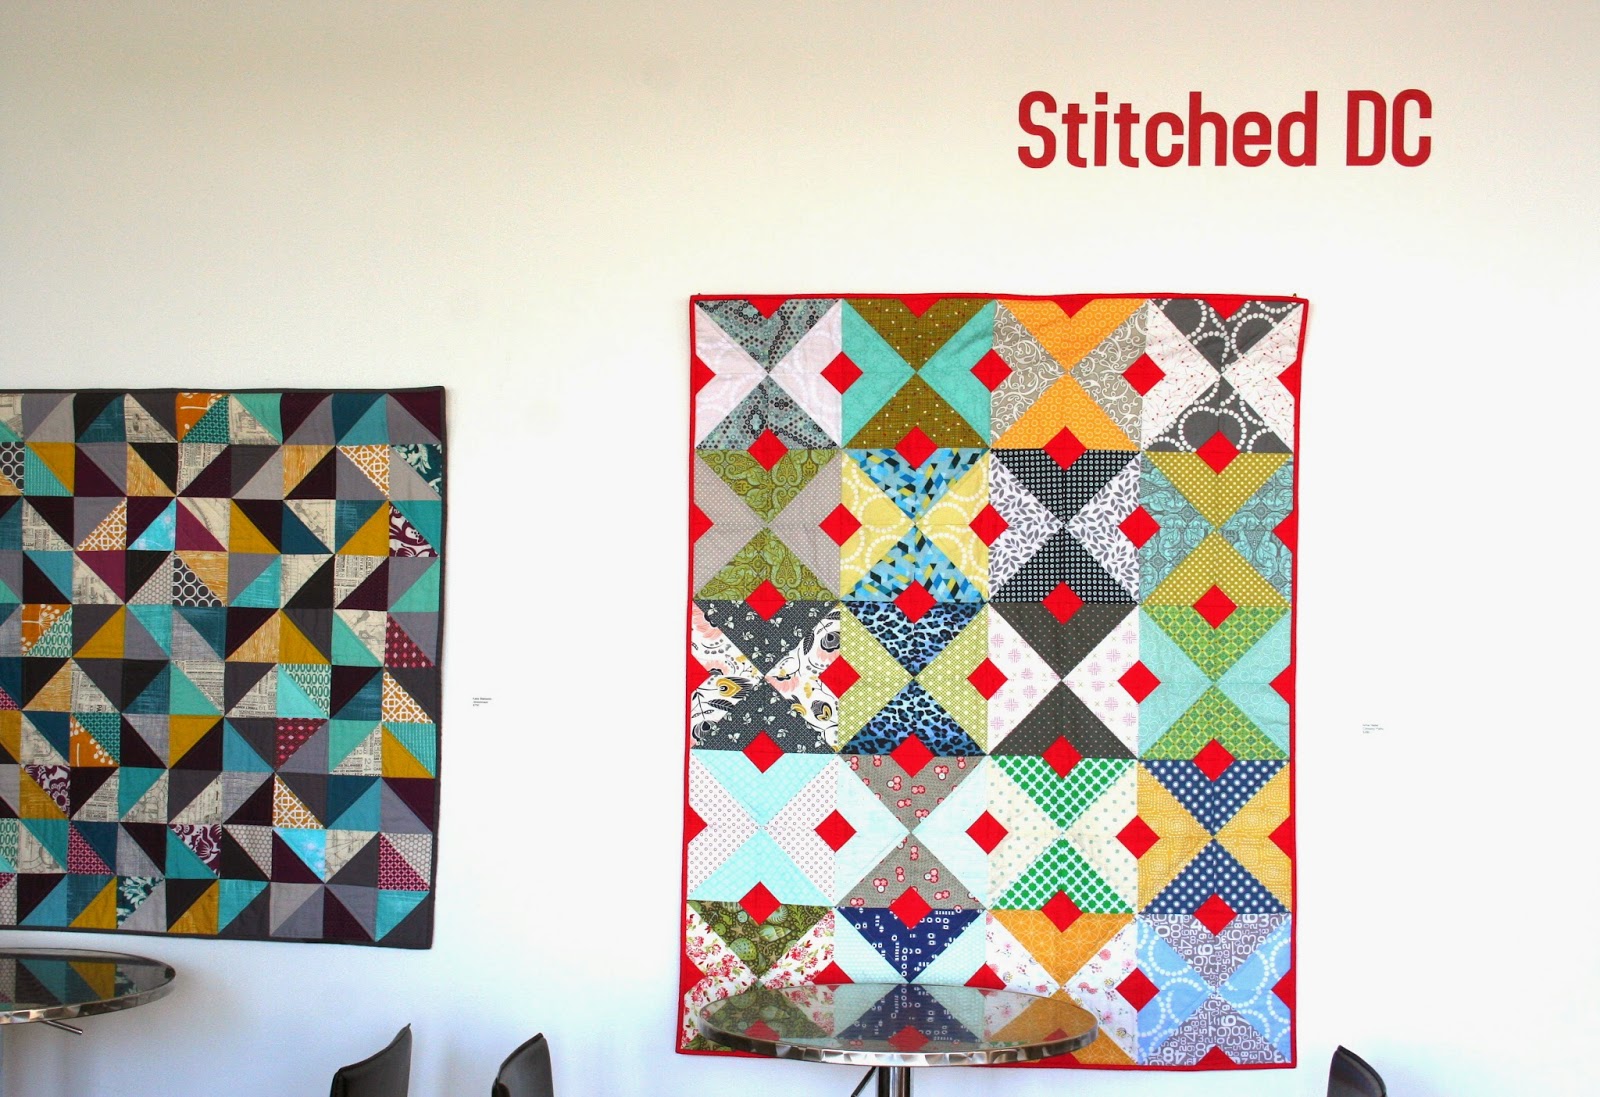 Stitched DC  in the Anacostia Arts Center